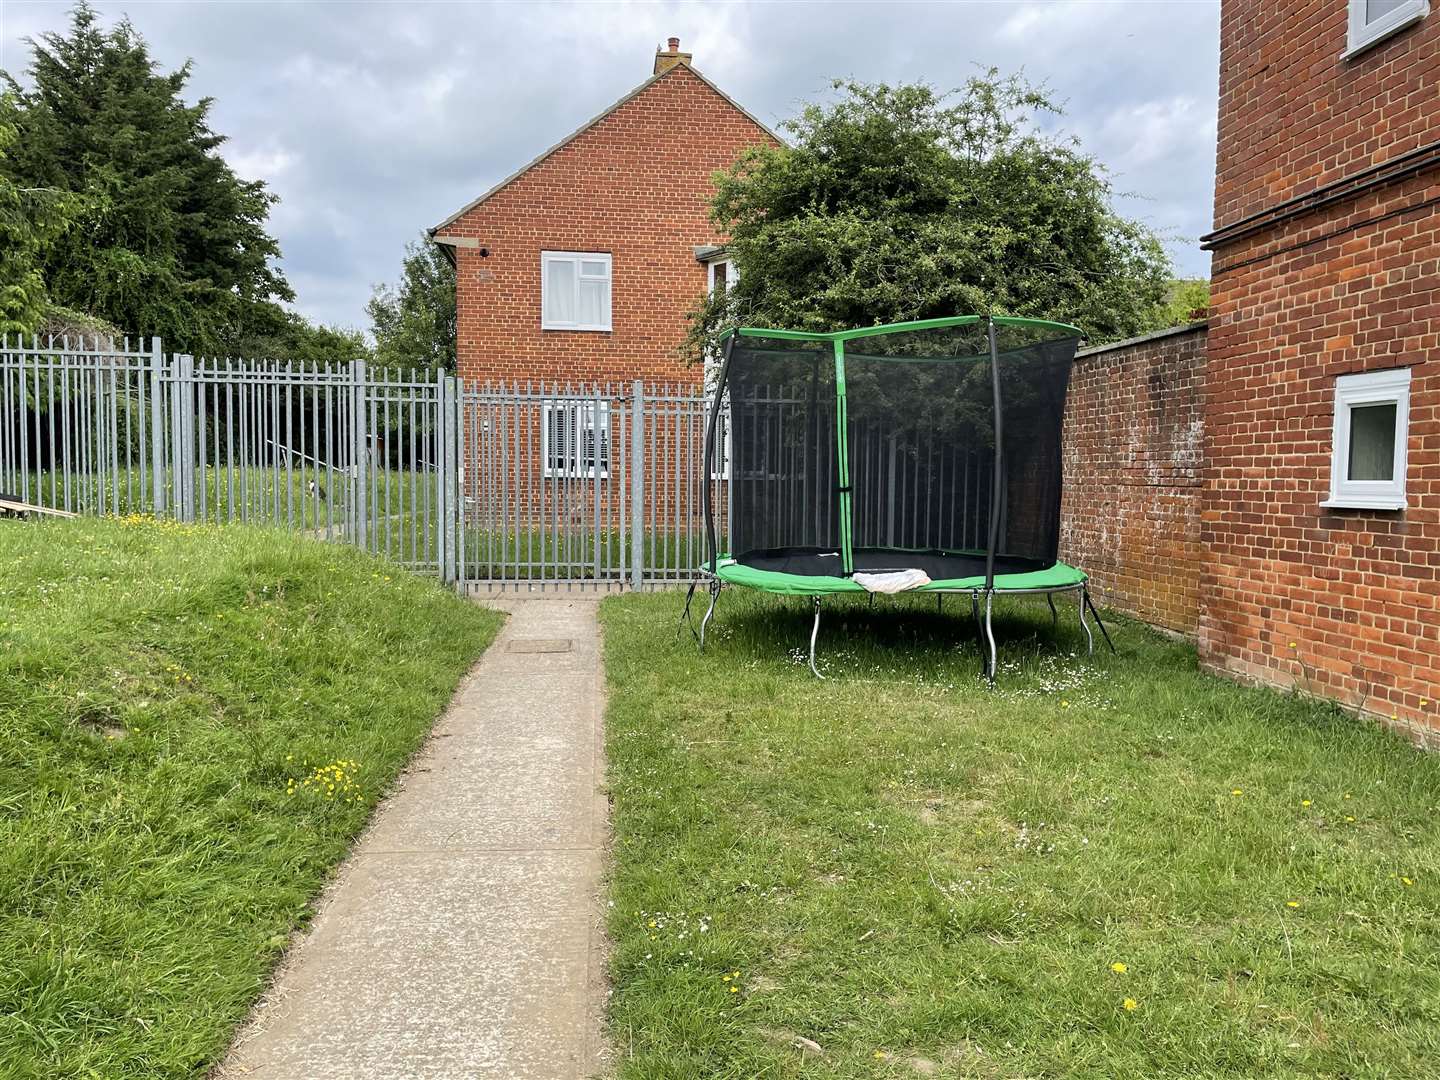 One trampoline is near to the building but the path and gate remain clear